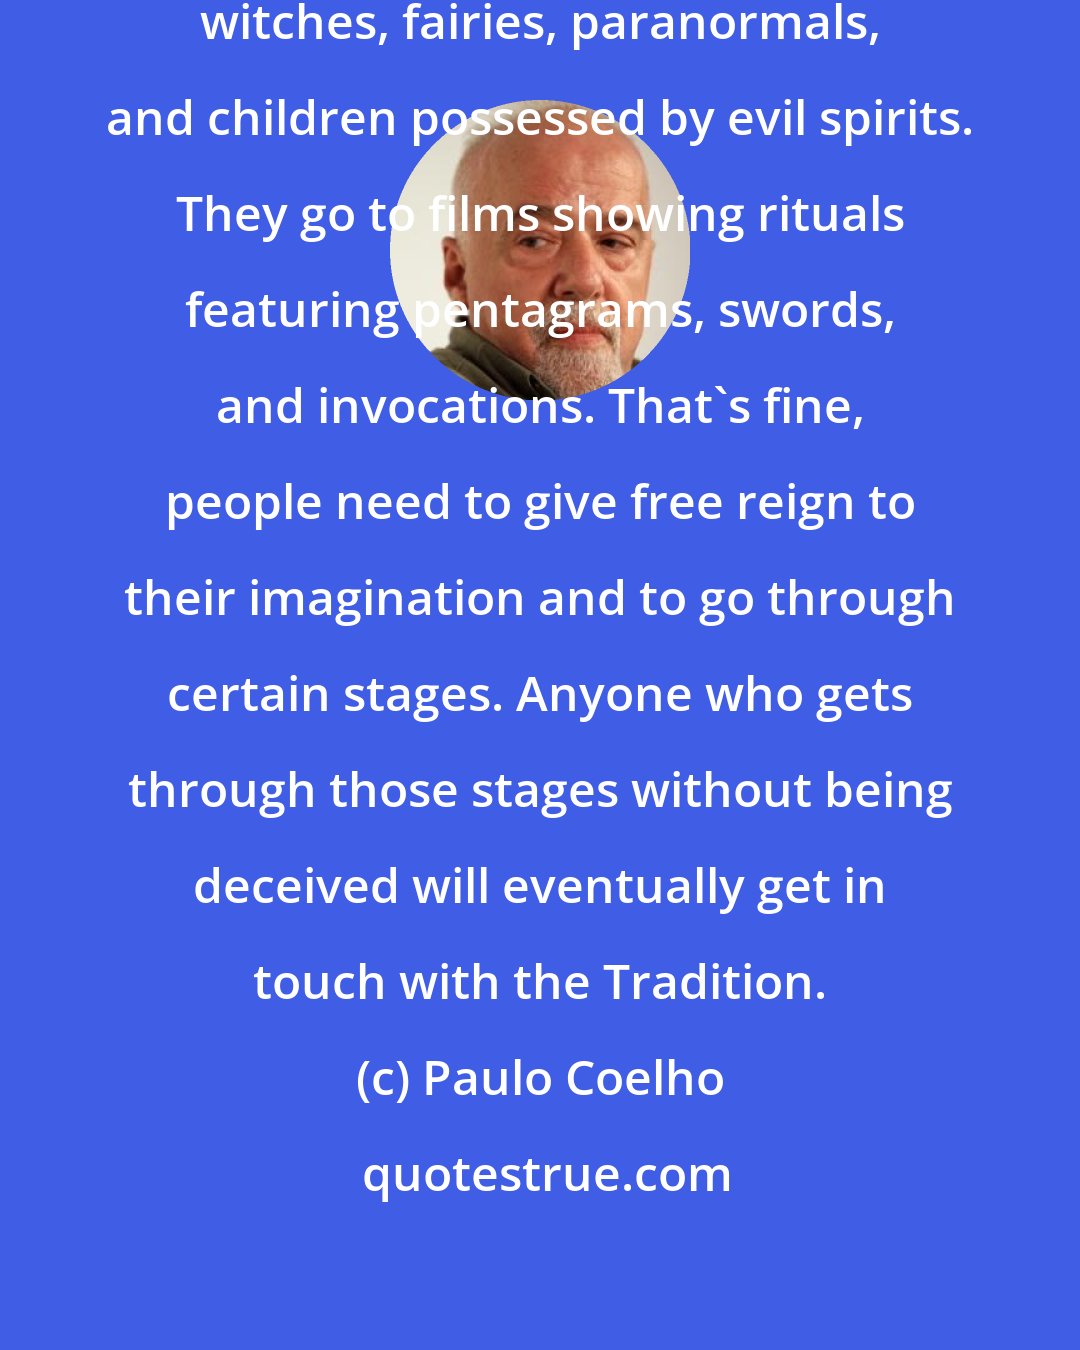 Paulo Coelho: People read a lot of stories about witches, fairies, paranormals, and children possessed by evil spirits. They go to films showing rituals featuring pentagrams, swords, and invocations. That's fine, people need to give free reign to their imagination and to go through certain stages. Anyone who gets through those stages without being deceived will eventually get in touch with the Tradition.